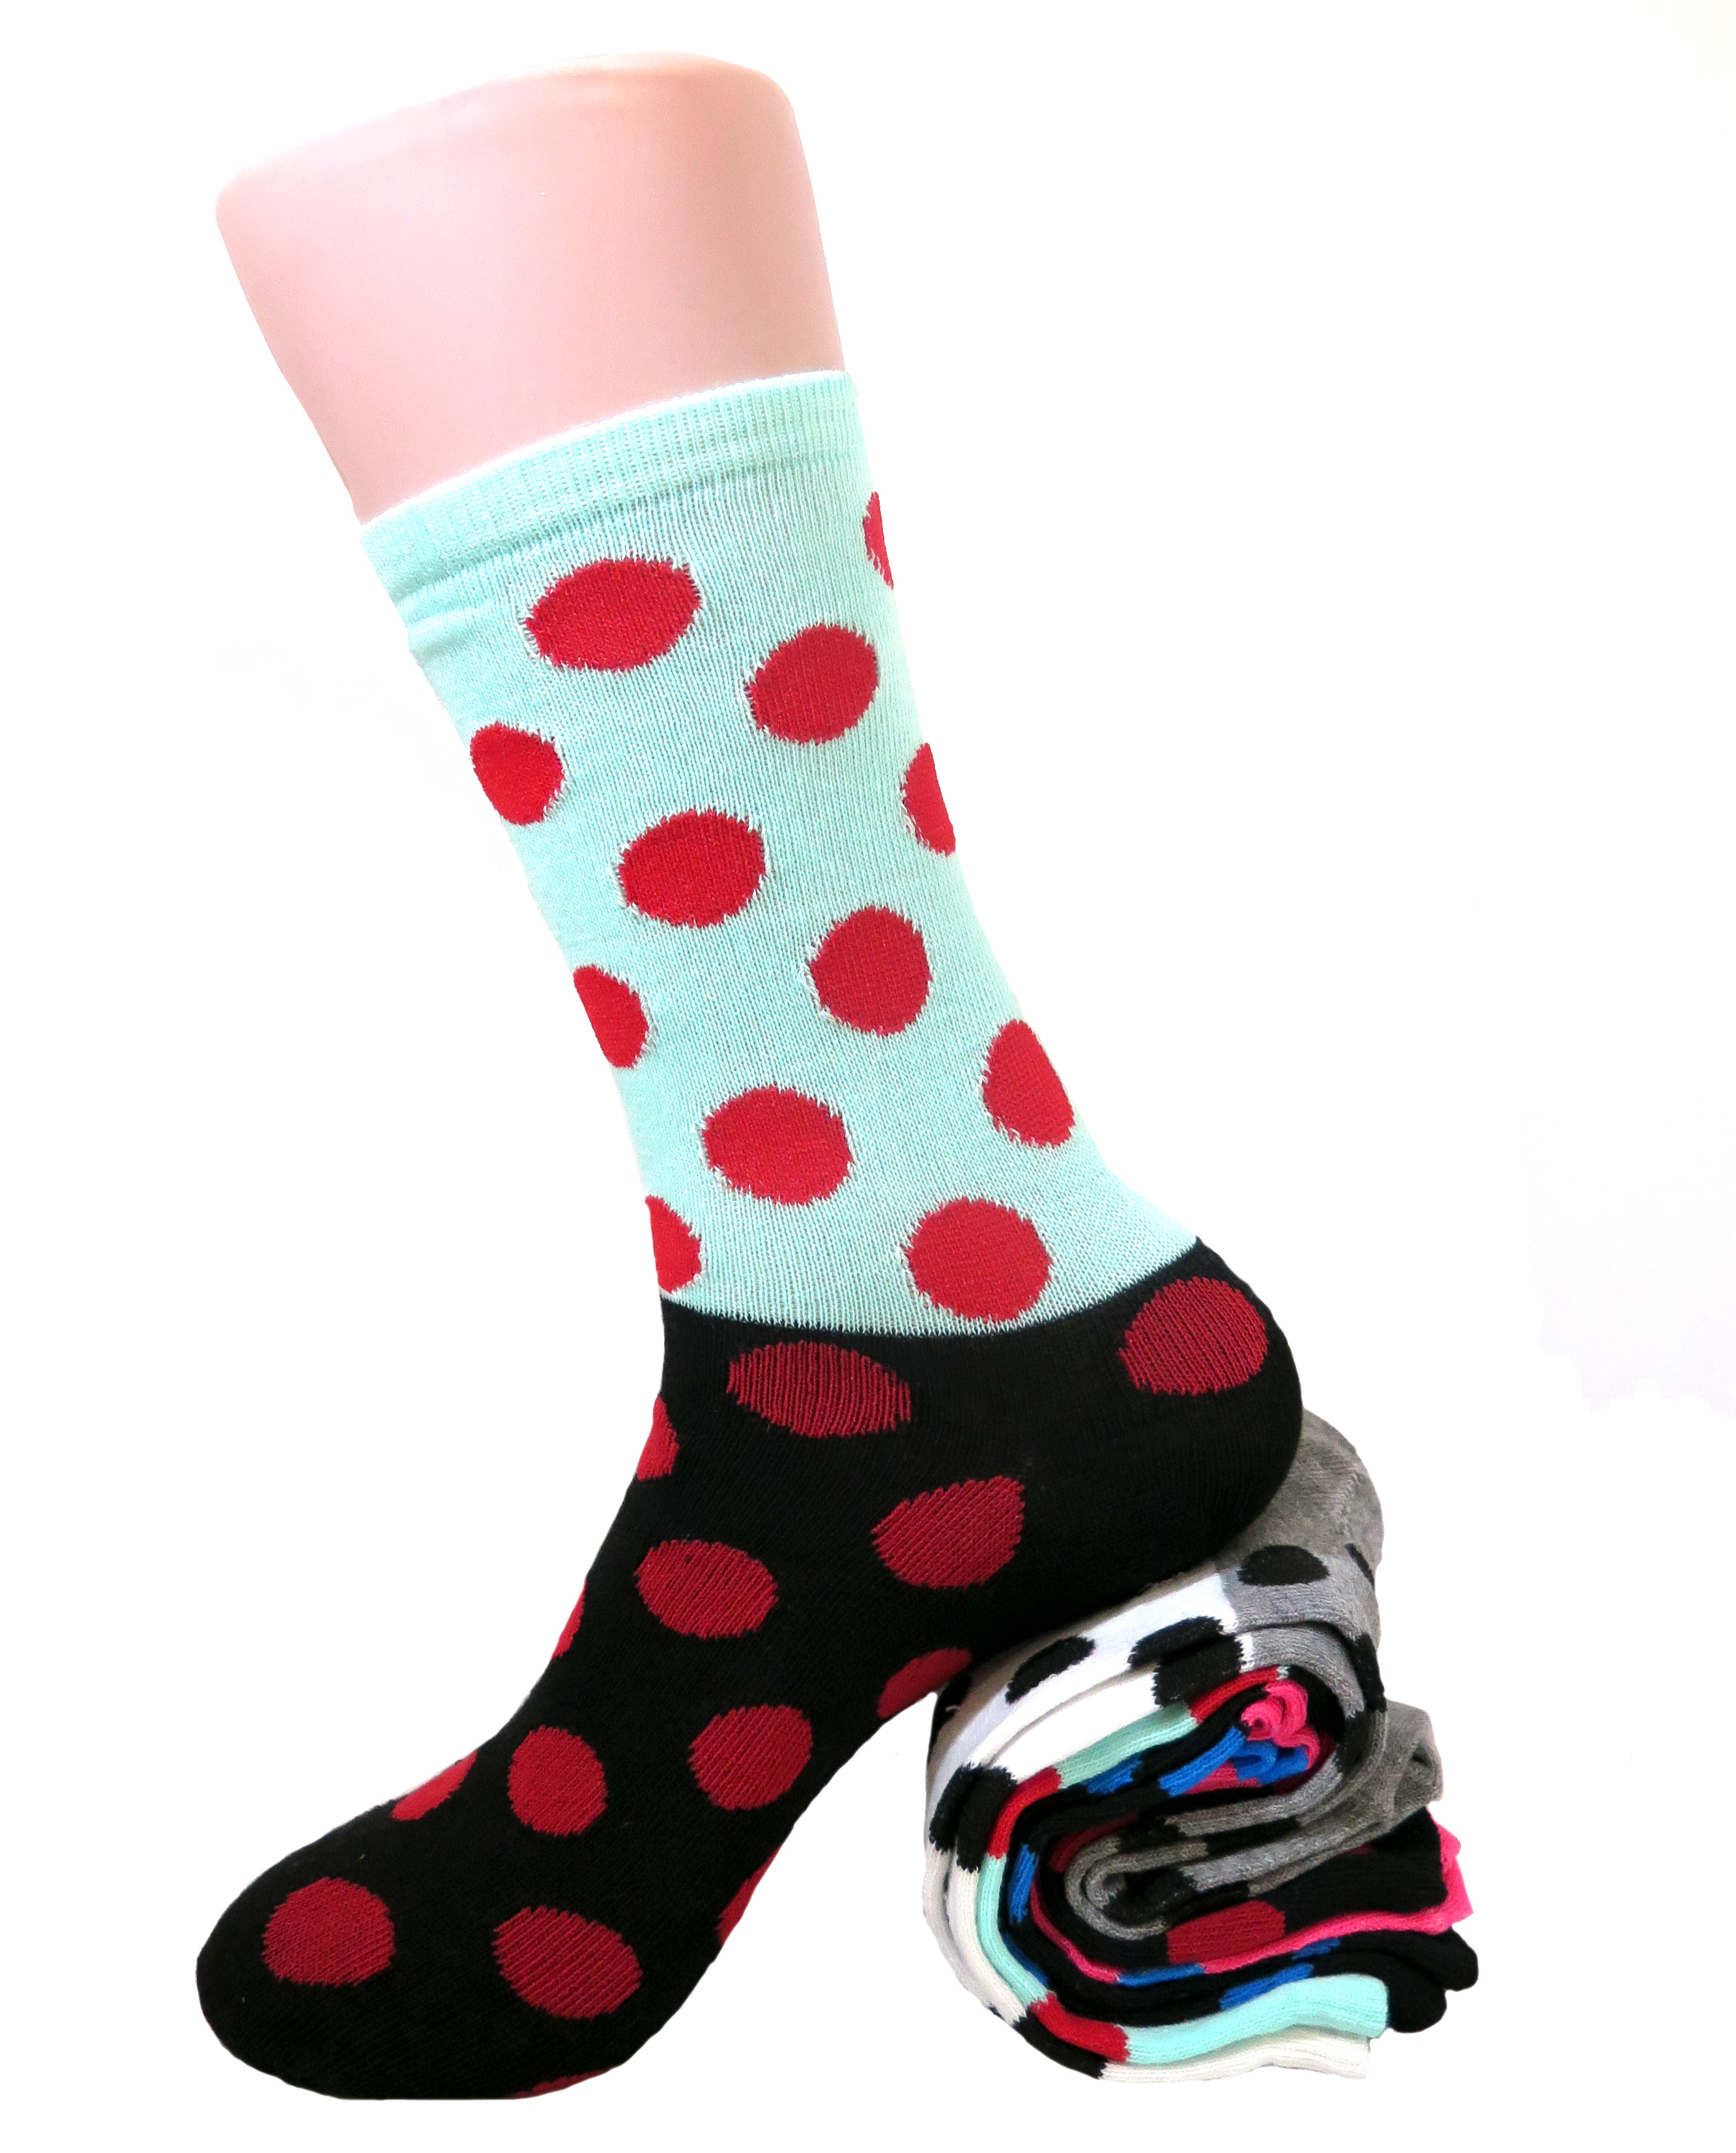 Fun & Colorful Two- Tone Polka Dot Assorted 6 Pack Crew Socks - image 2 of 3